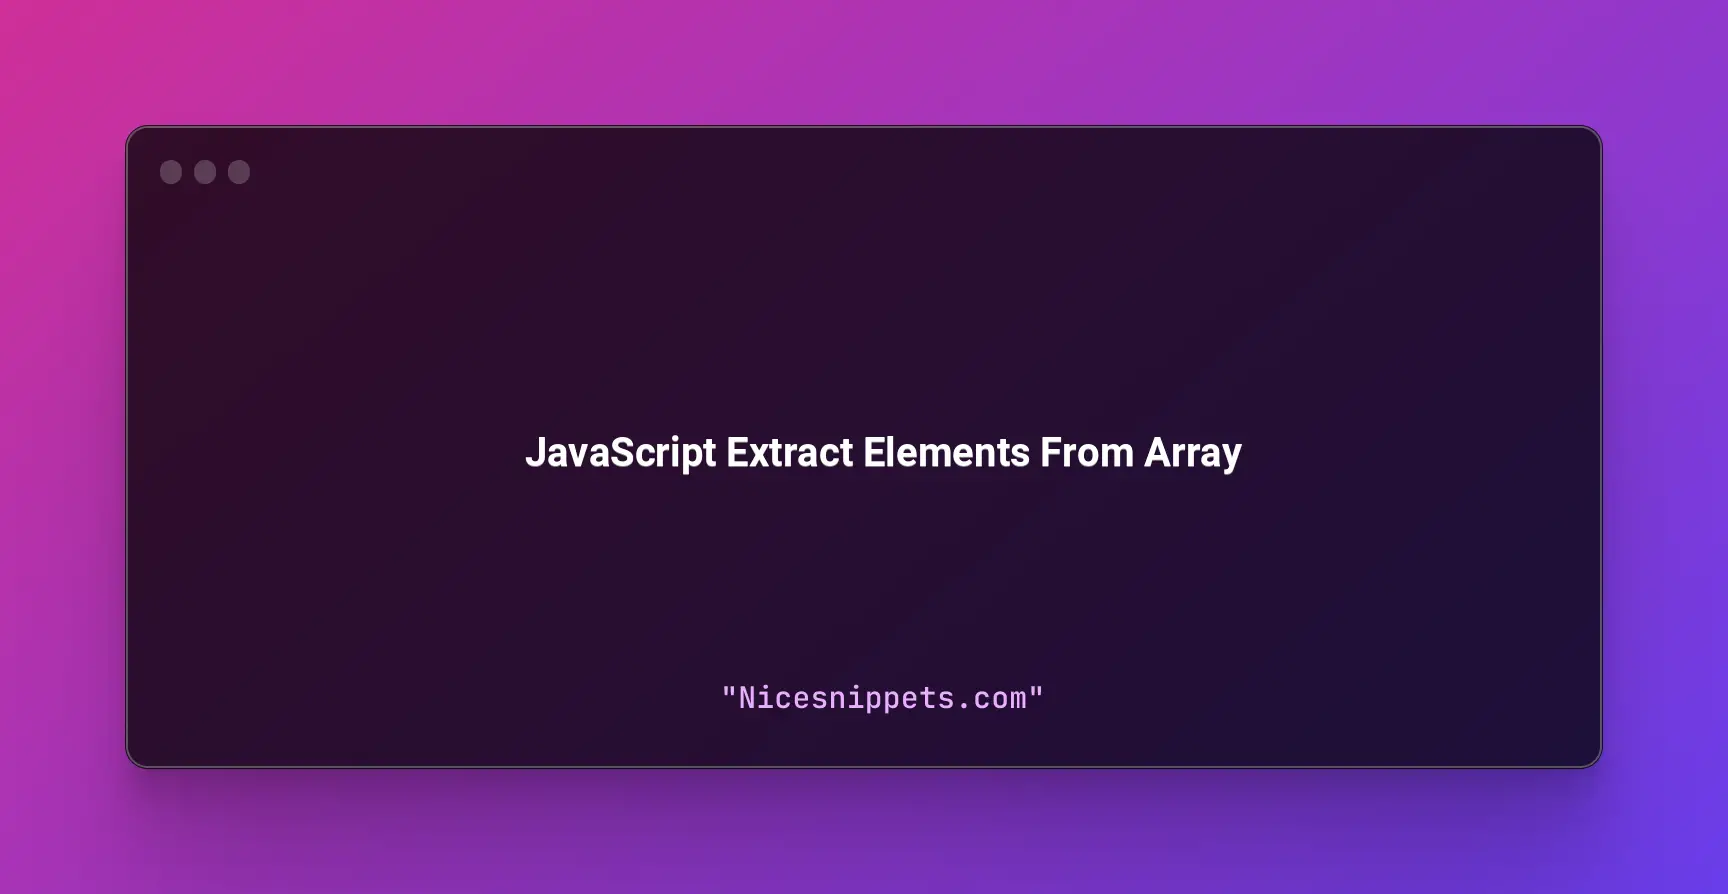 JavaScript Extract Elements From Array